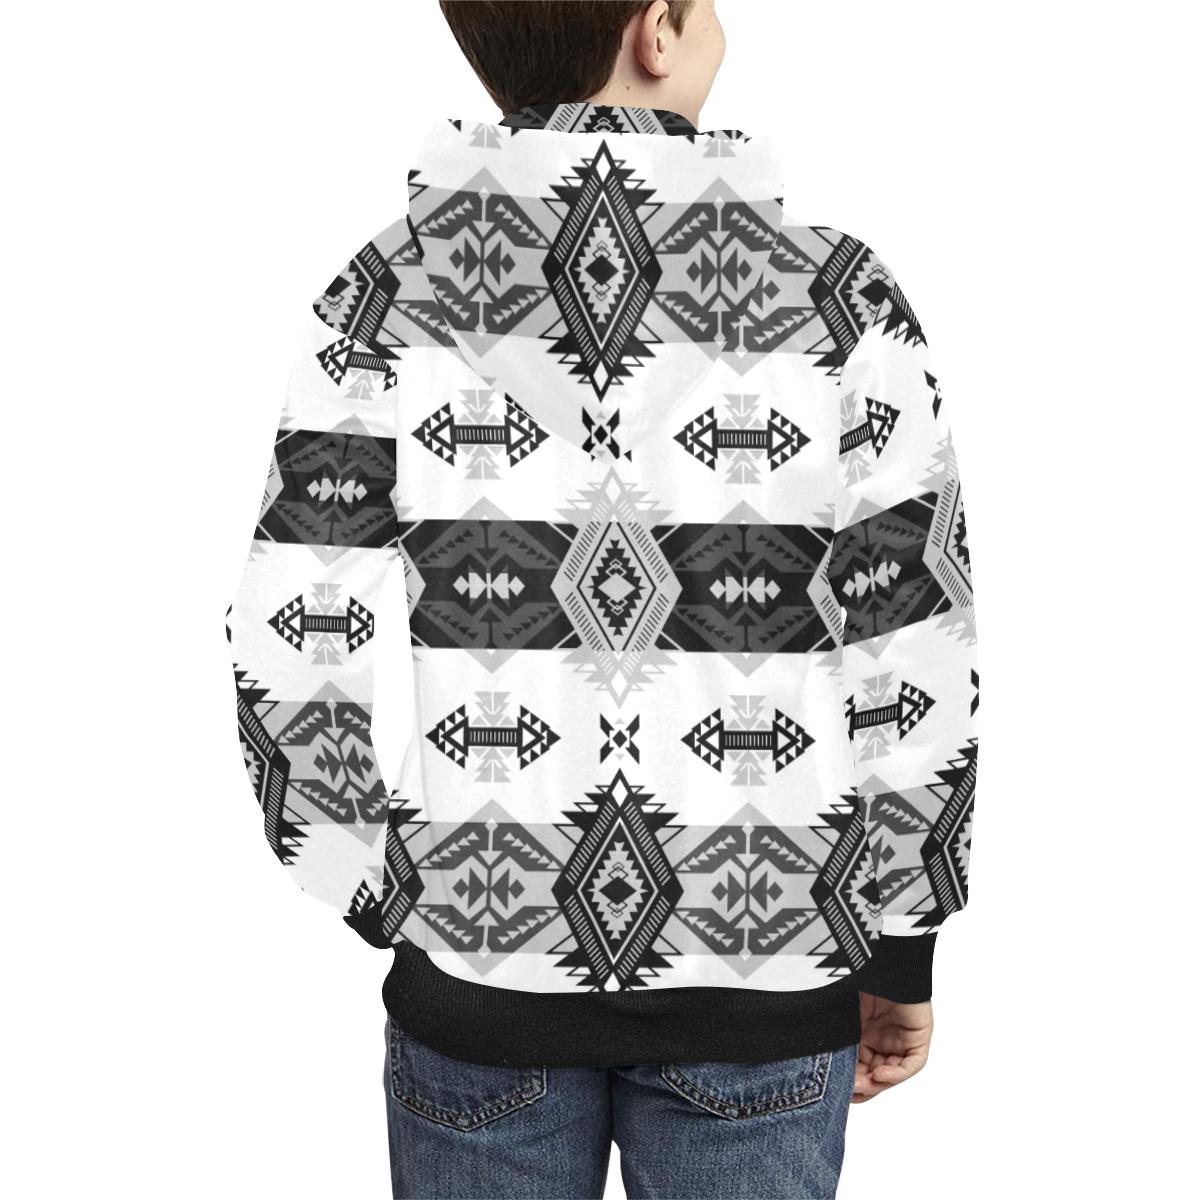 Sovereign Nation Black and White Kids' All Over Print Hoodie (Model H38) Kids' AOP Hoodie (H38) e-joyer 